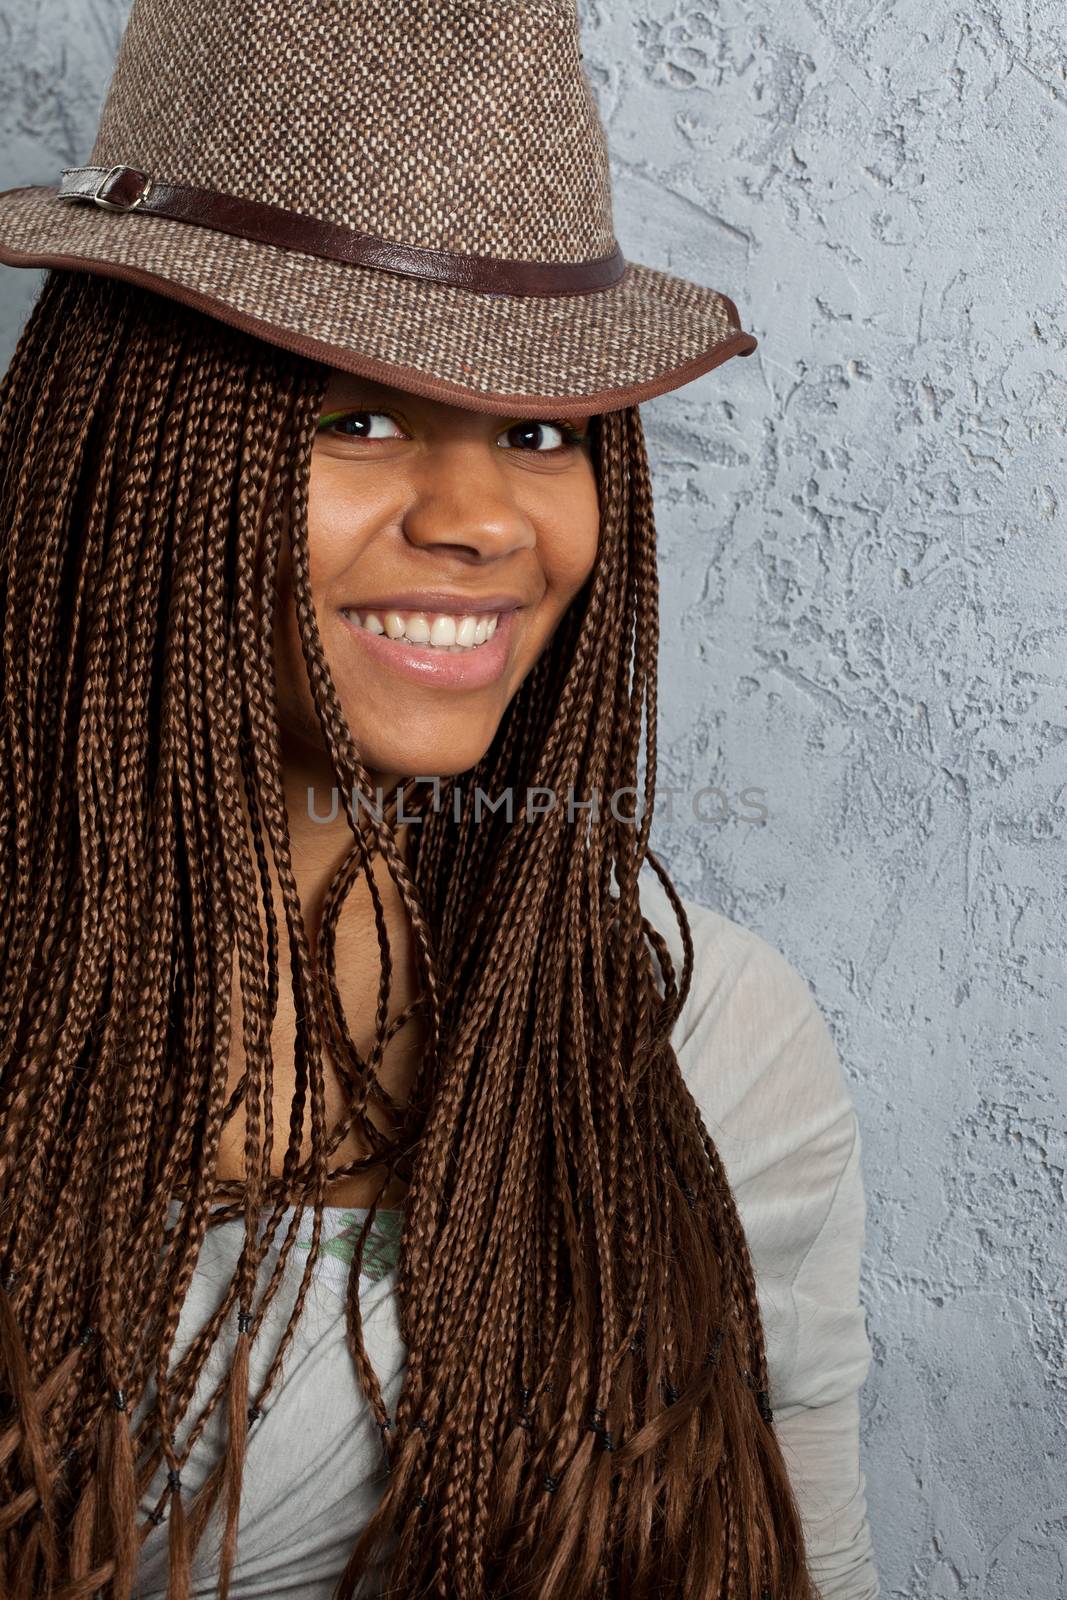 young black woman with African braids in a hat